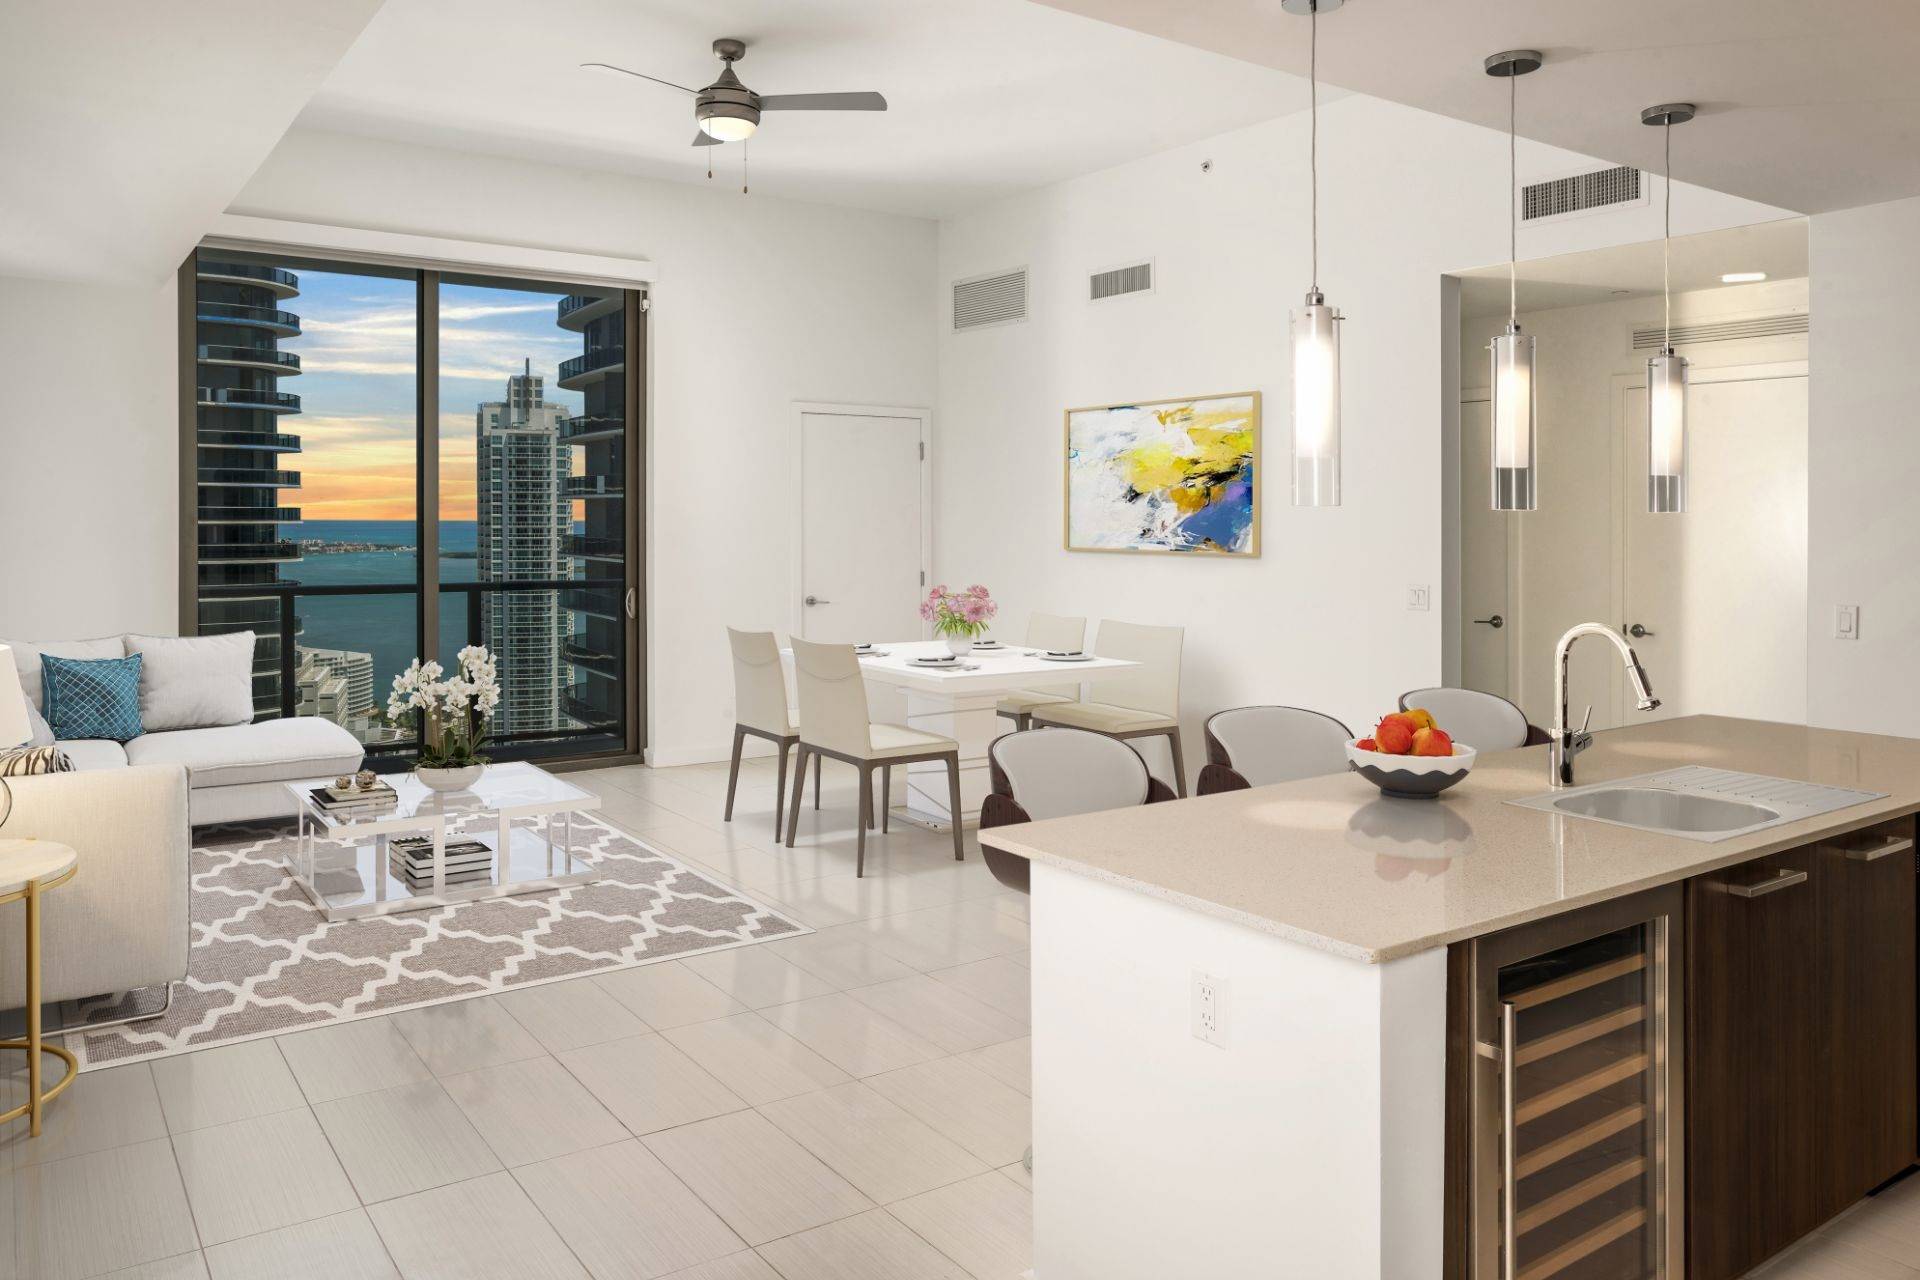 2 MONTHS FREE| Core of Brickell| Matchless Penthouse 3br/2ba| 1533 SF